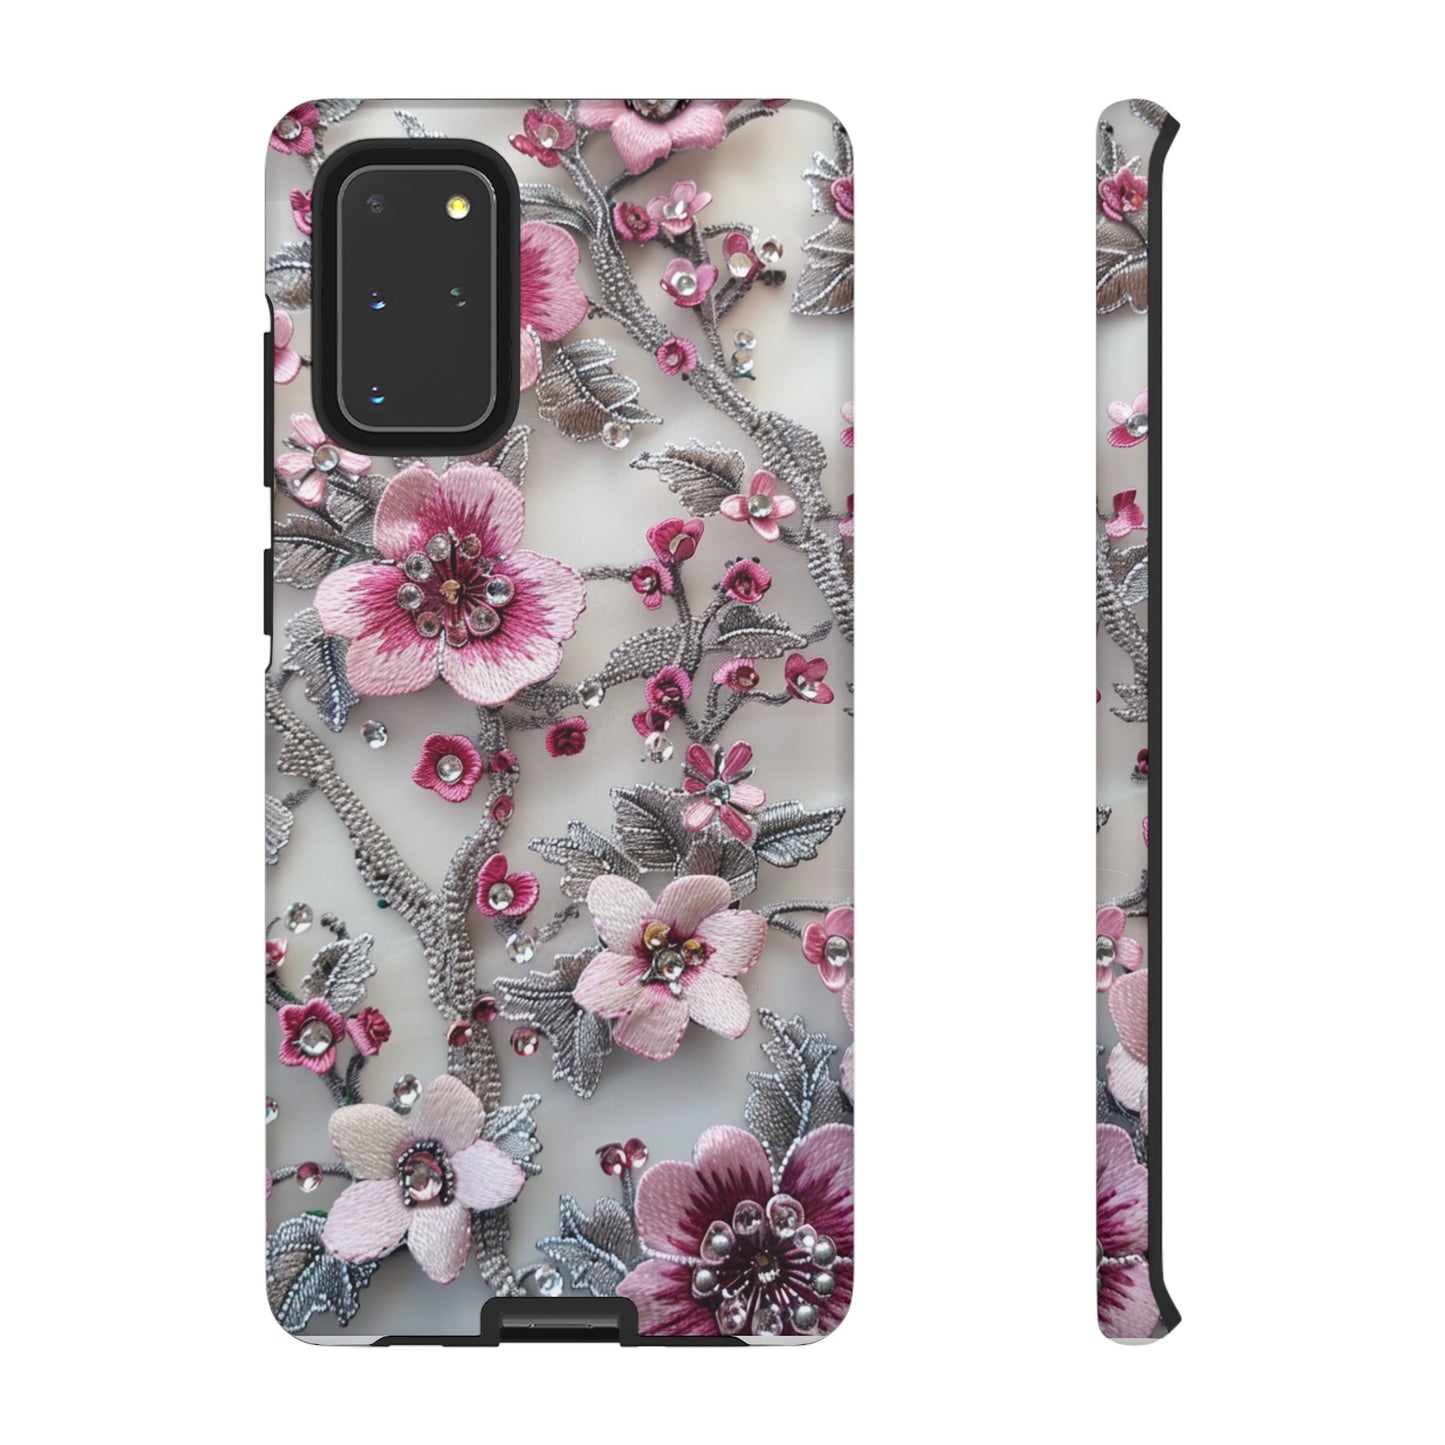 Best iPhone cases with coquette floral design